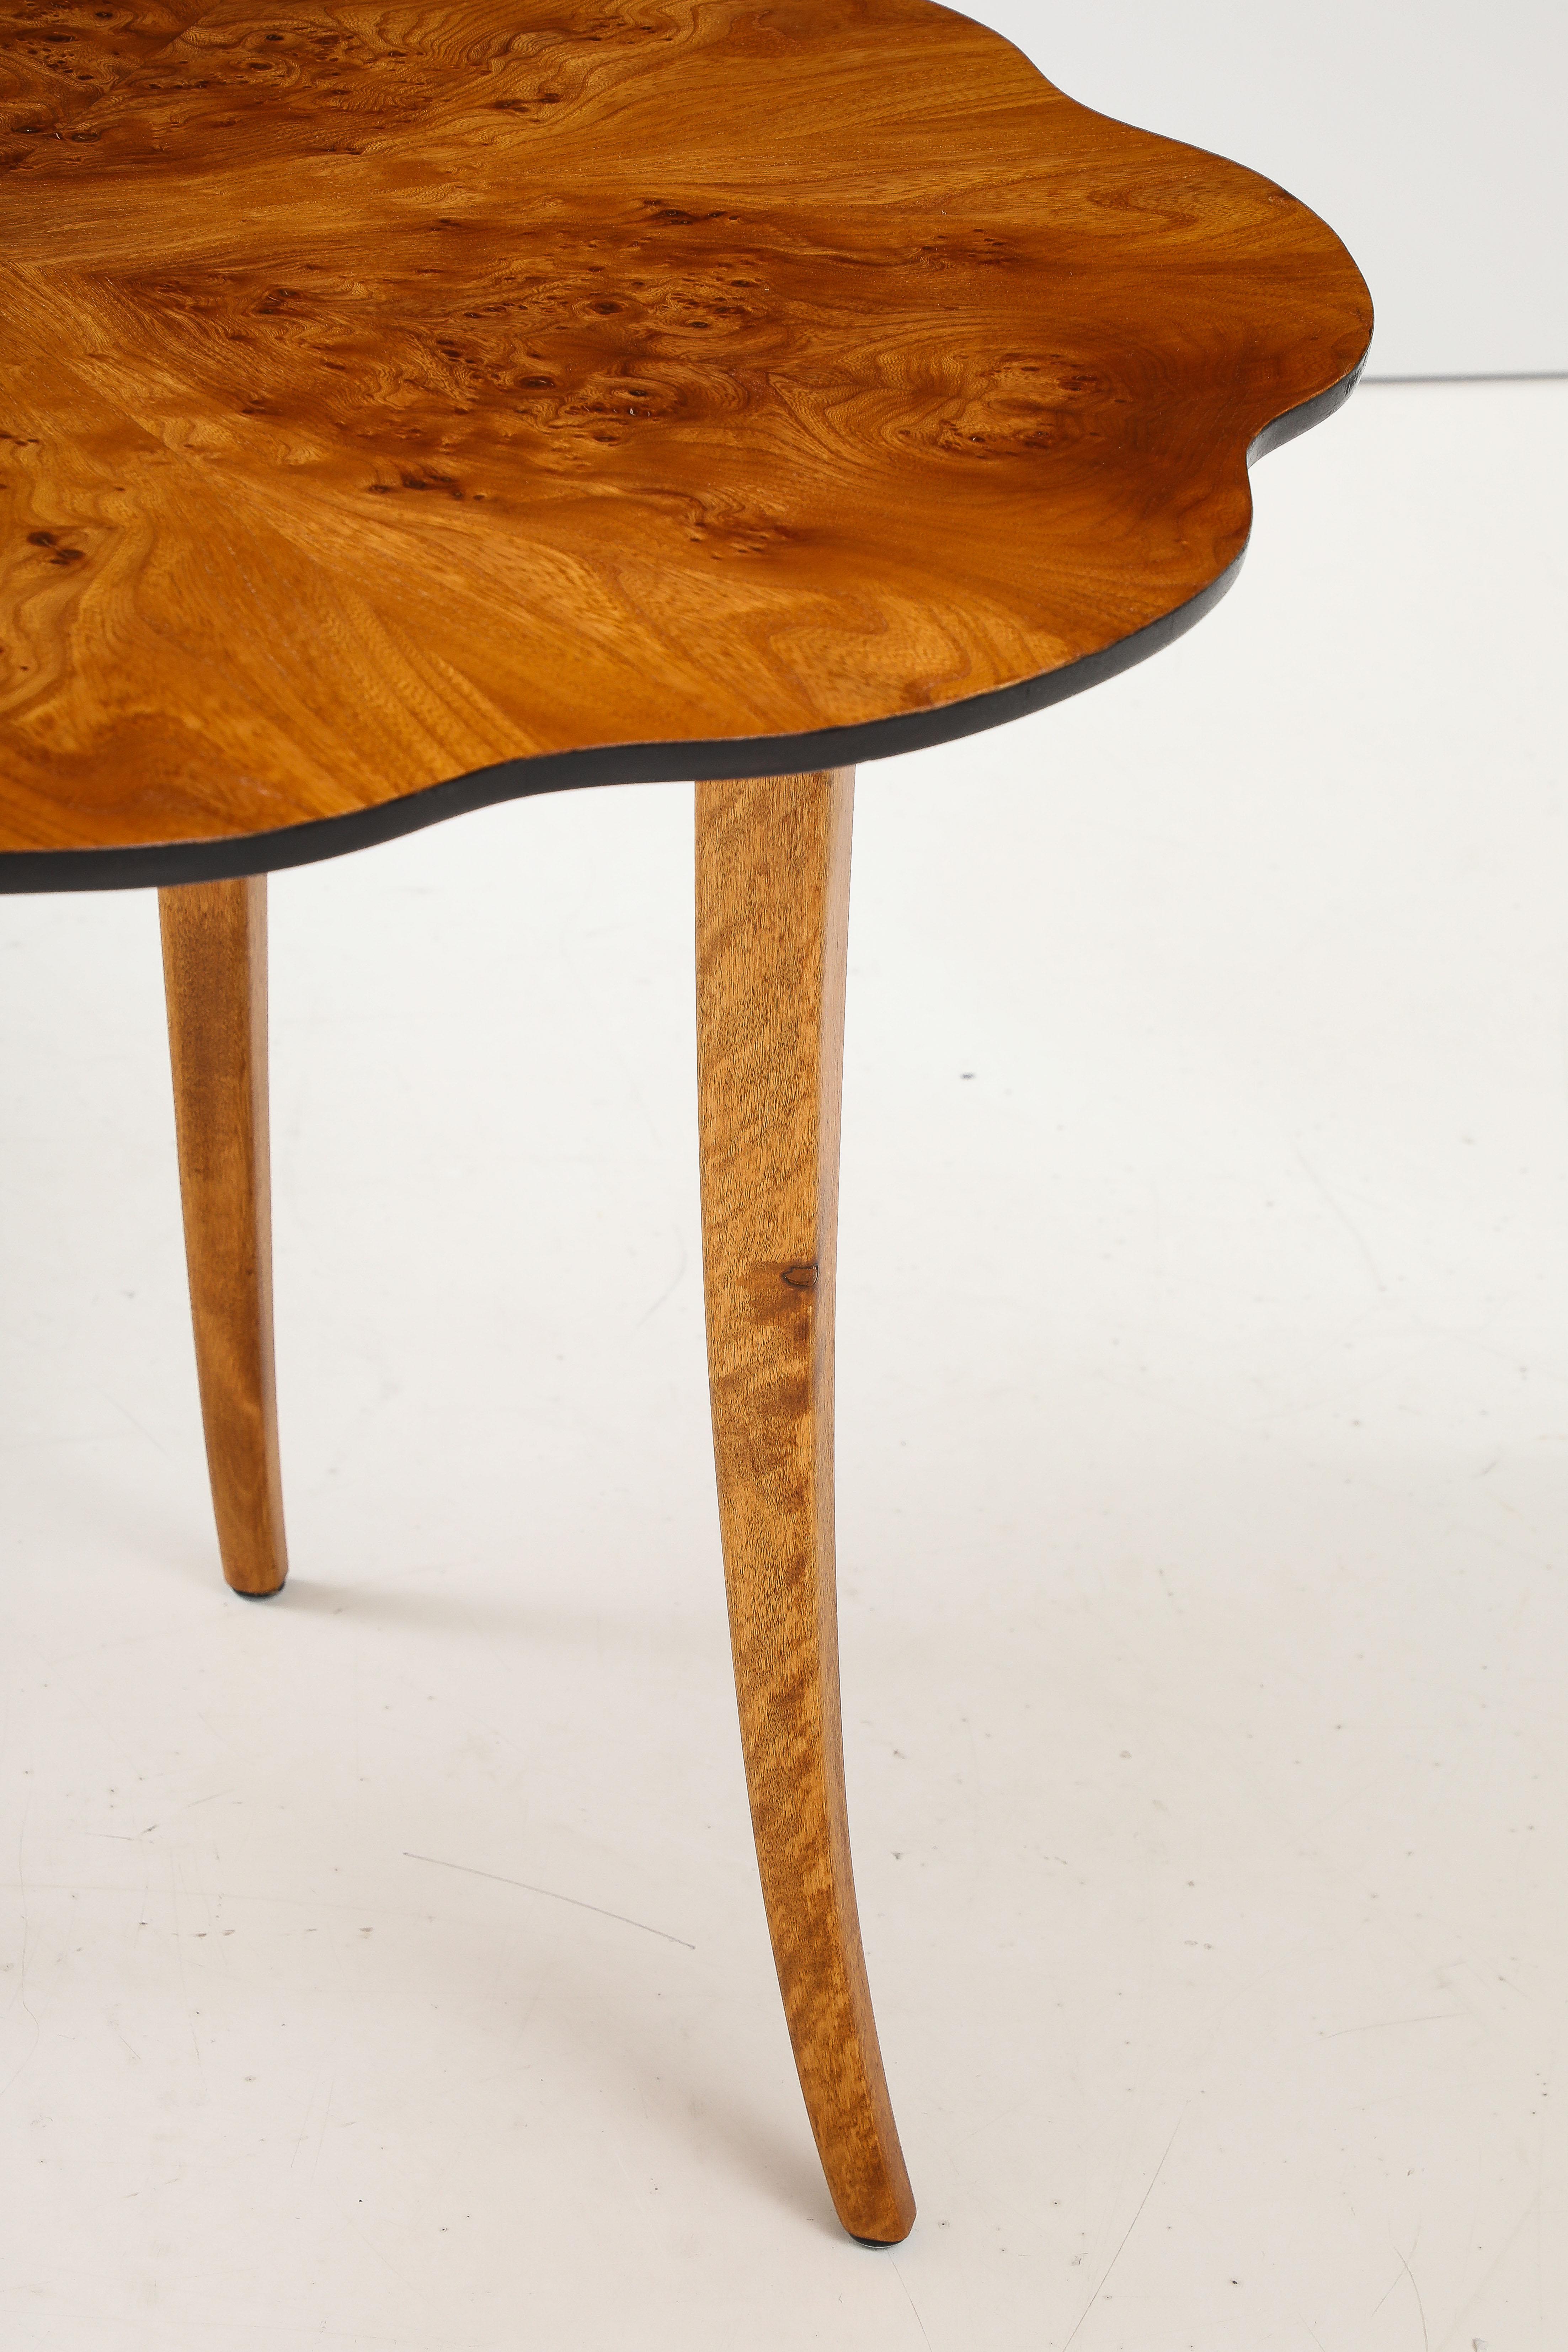 A Swedish Modern Elmroot Side Table, Circa 1950s For Sale 2